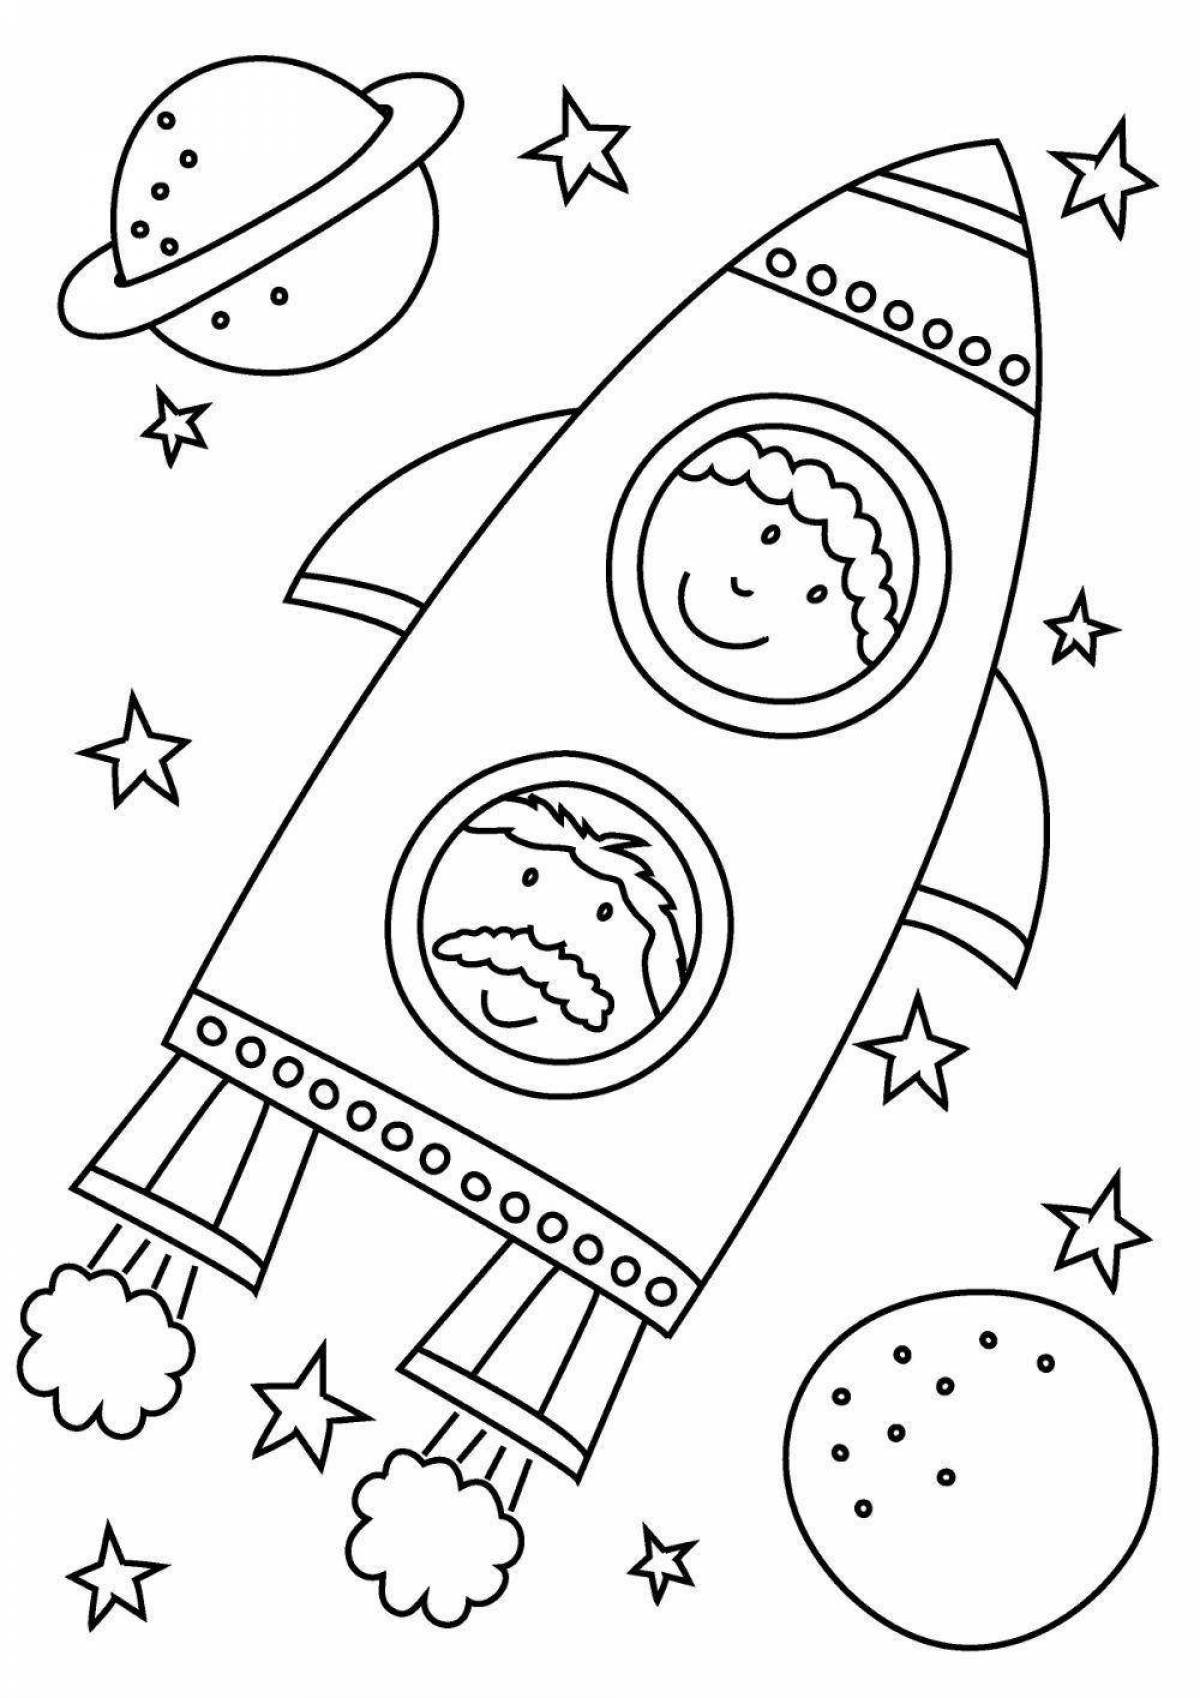 Creative space coloring book for 5-6 year olds